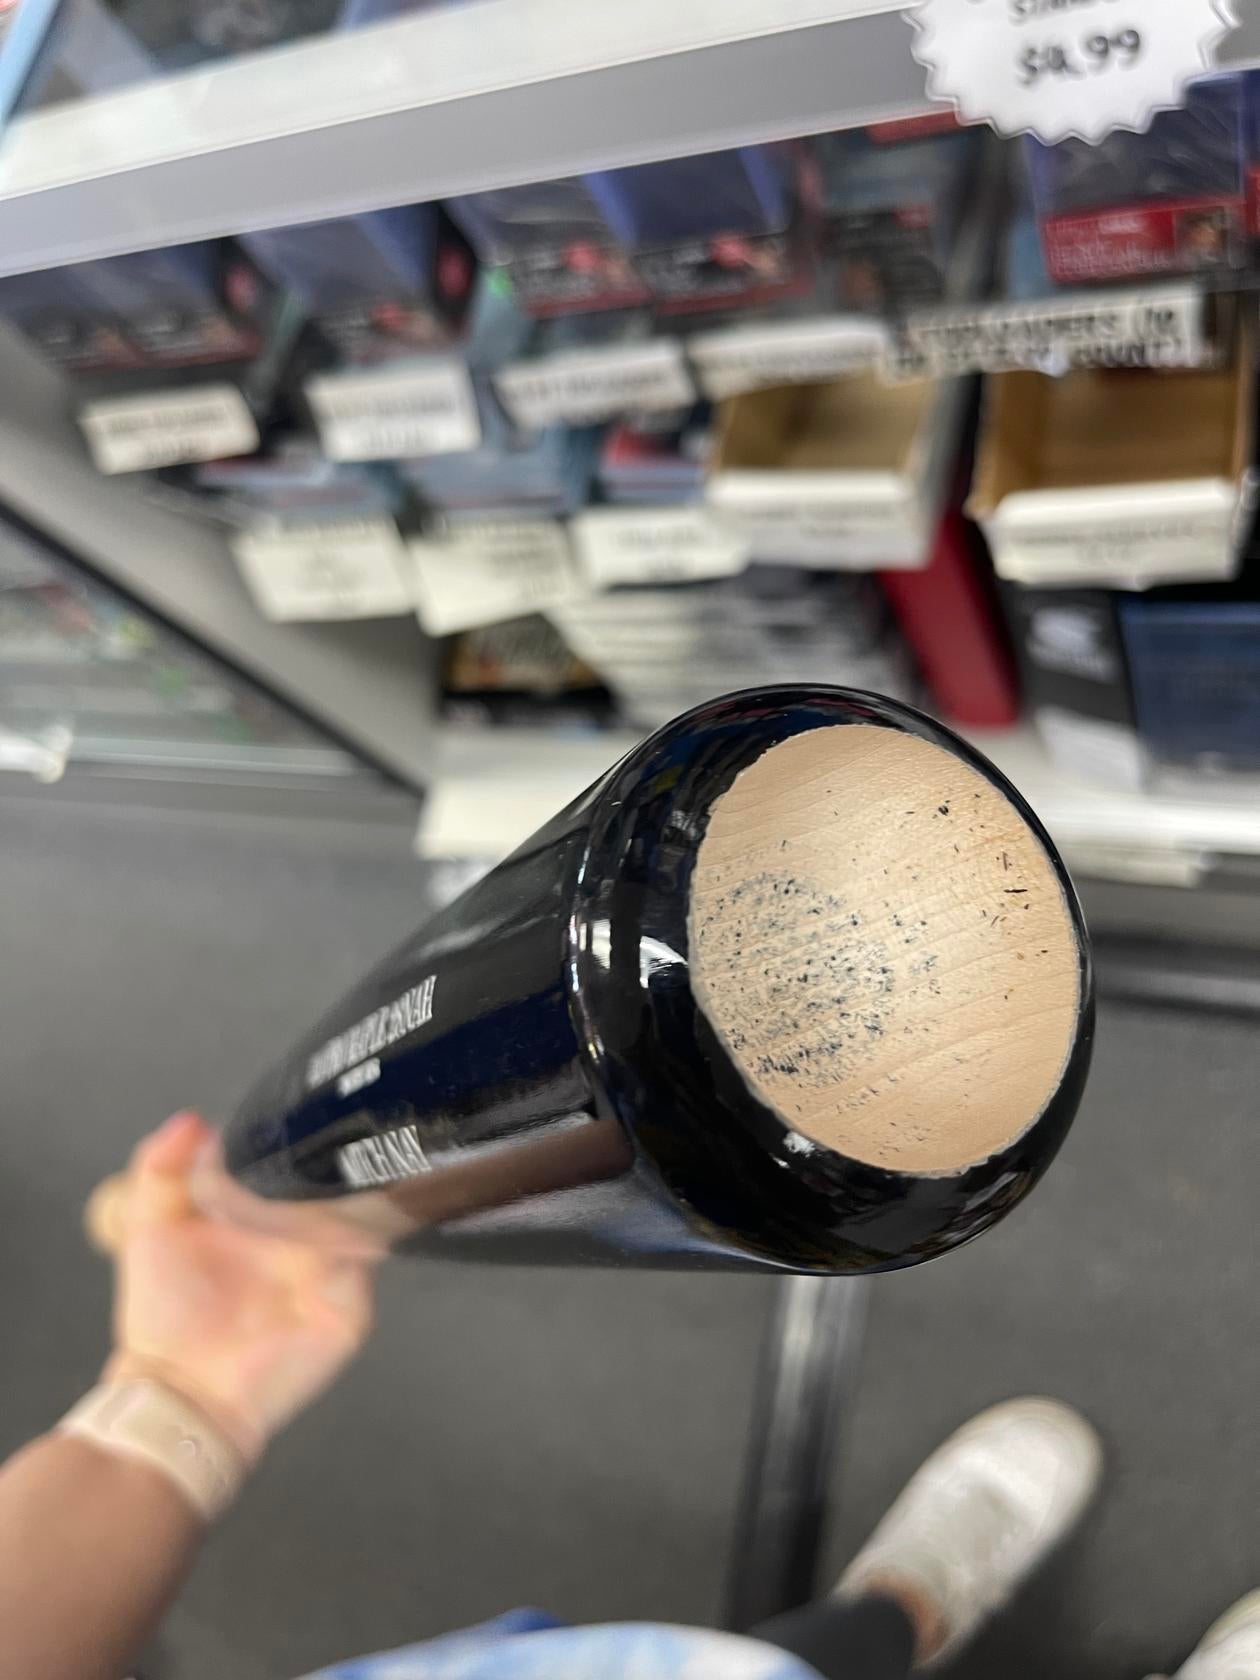 Robin Yount Autographed w/ Inscription HOF '99 Baseball Bat 34.0 Pro Maple 28NAH Mitch Nay Old Hickory Bat | BoxSeat Collectibles